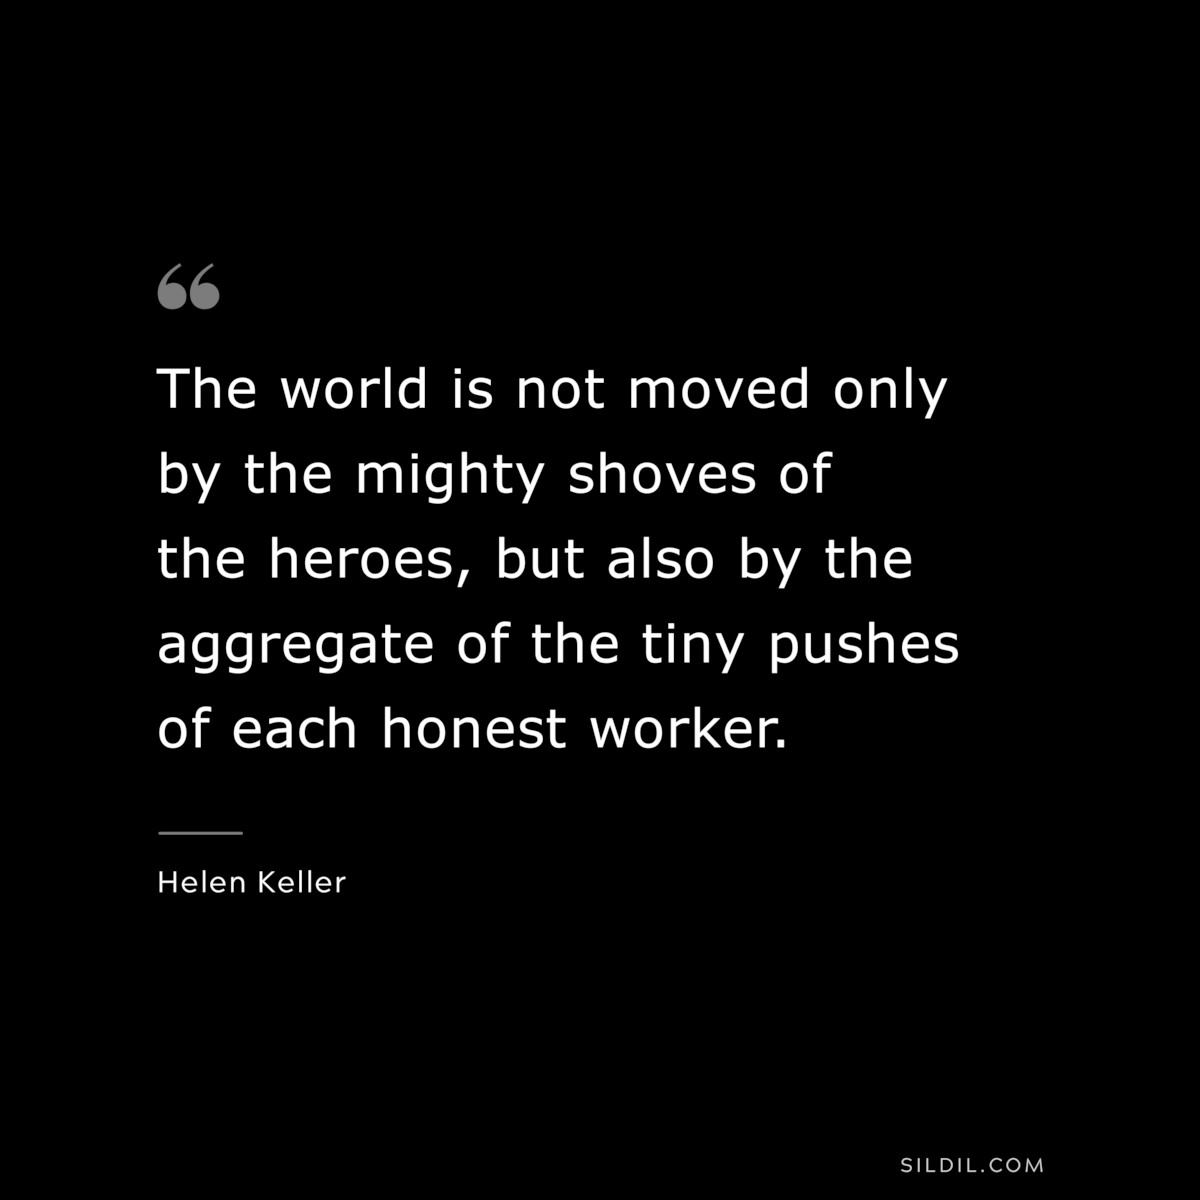 The world is not moved only by the mighty shoves of the heroes, but also by the aggregate of the tiny pushes of each honest worker. ― Helen Keller